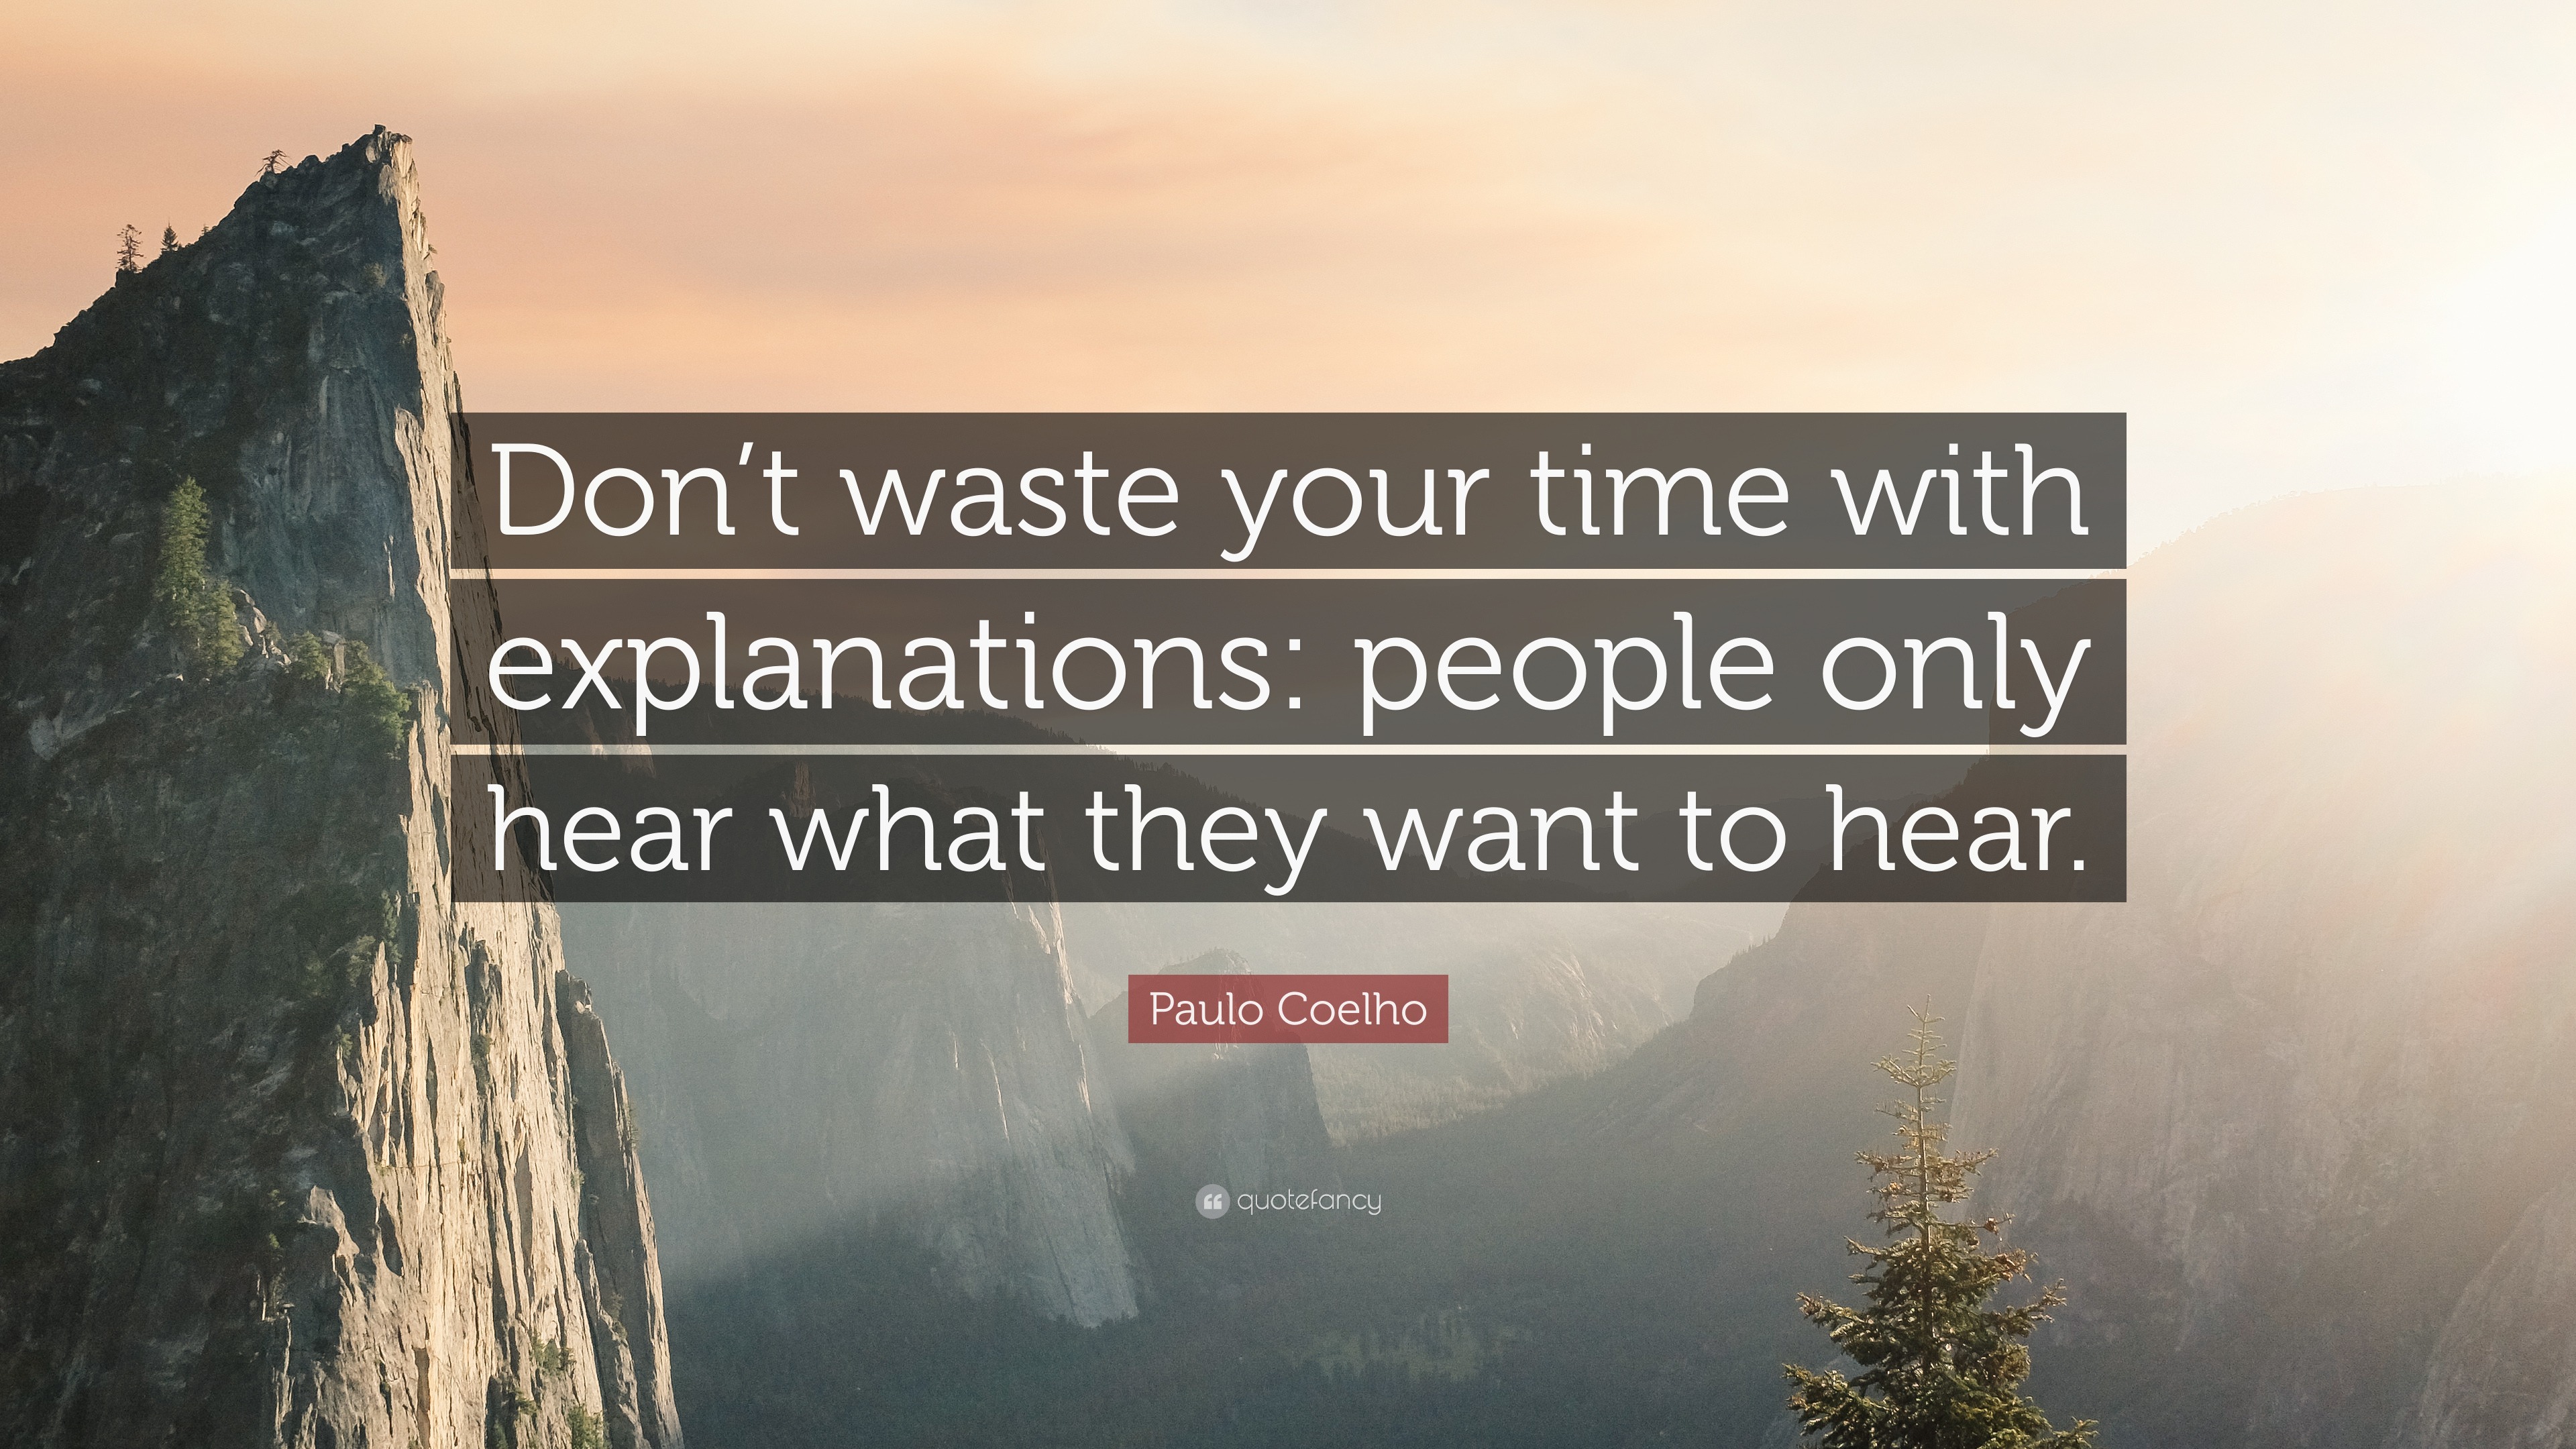 Paulo Coelho Quote: “Don’t waste your time with explanations: people ...